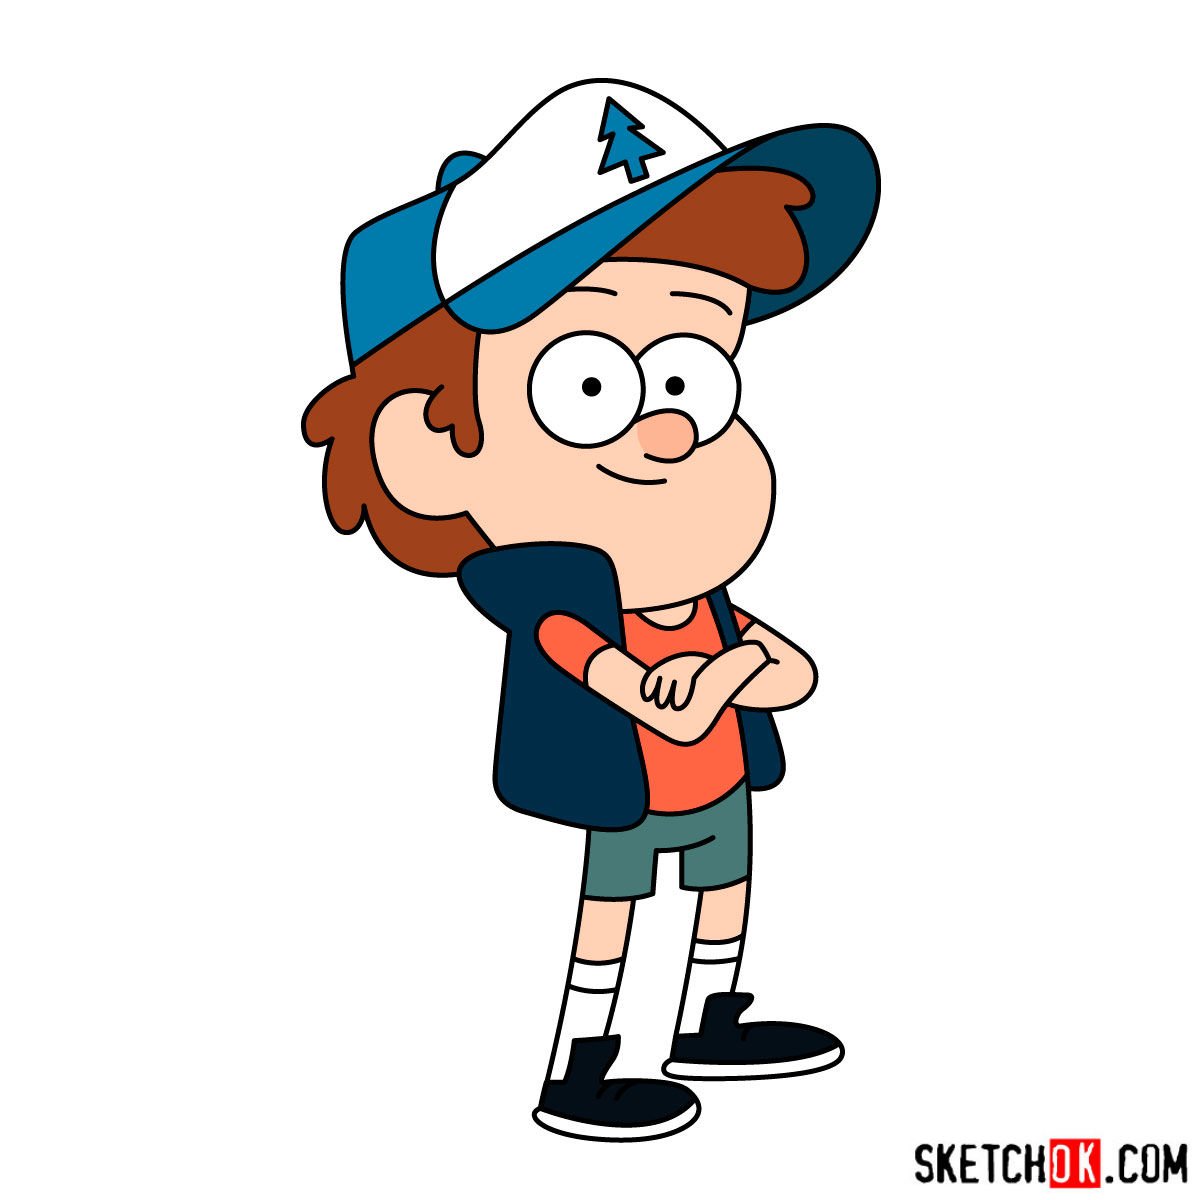 How to draw Dipper Pines